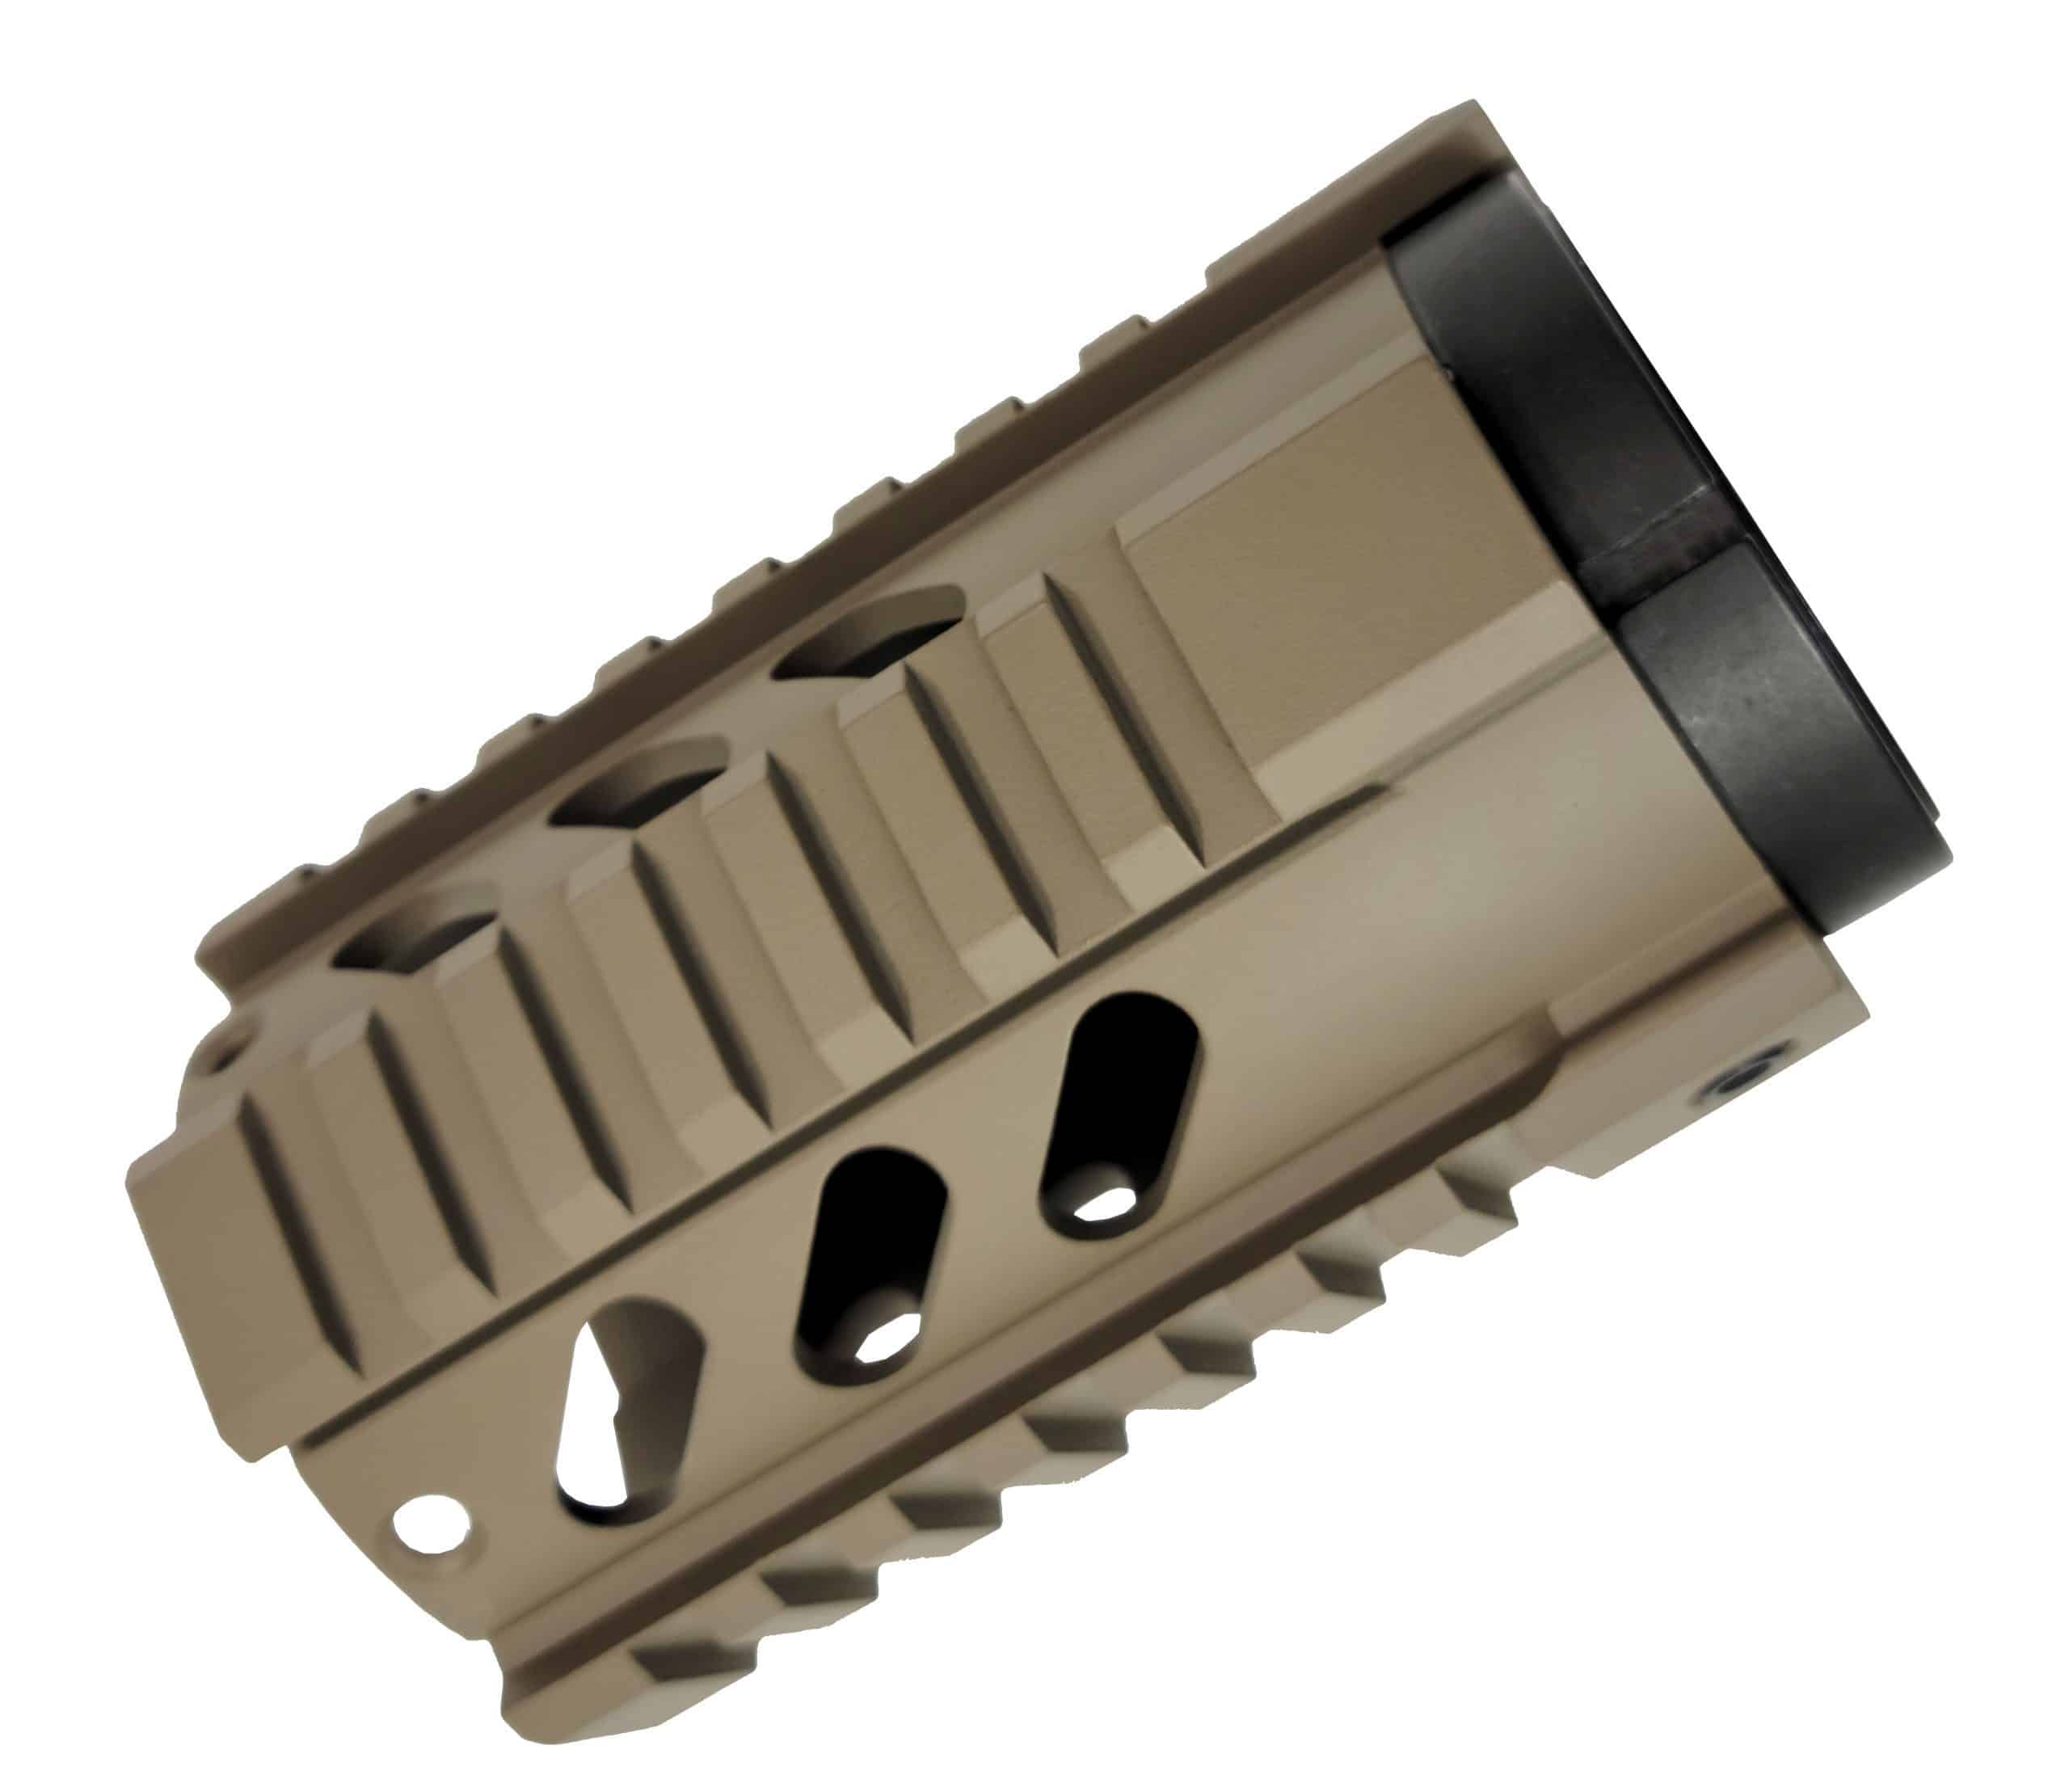 AR-15 4" Free Float Quad Rail System in FDE *CLOSEOUT*